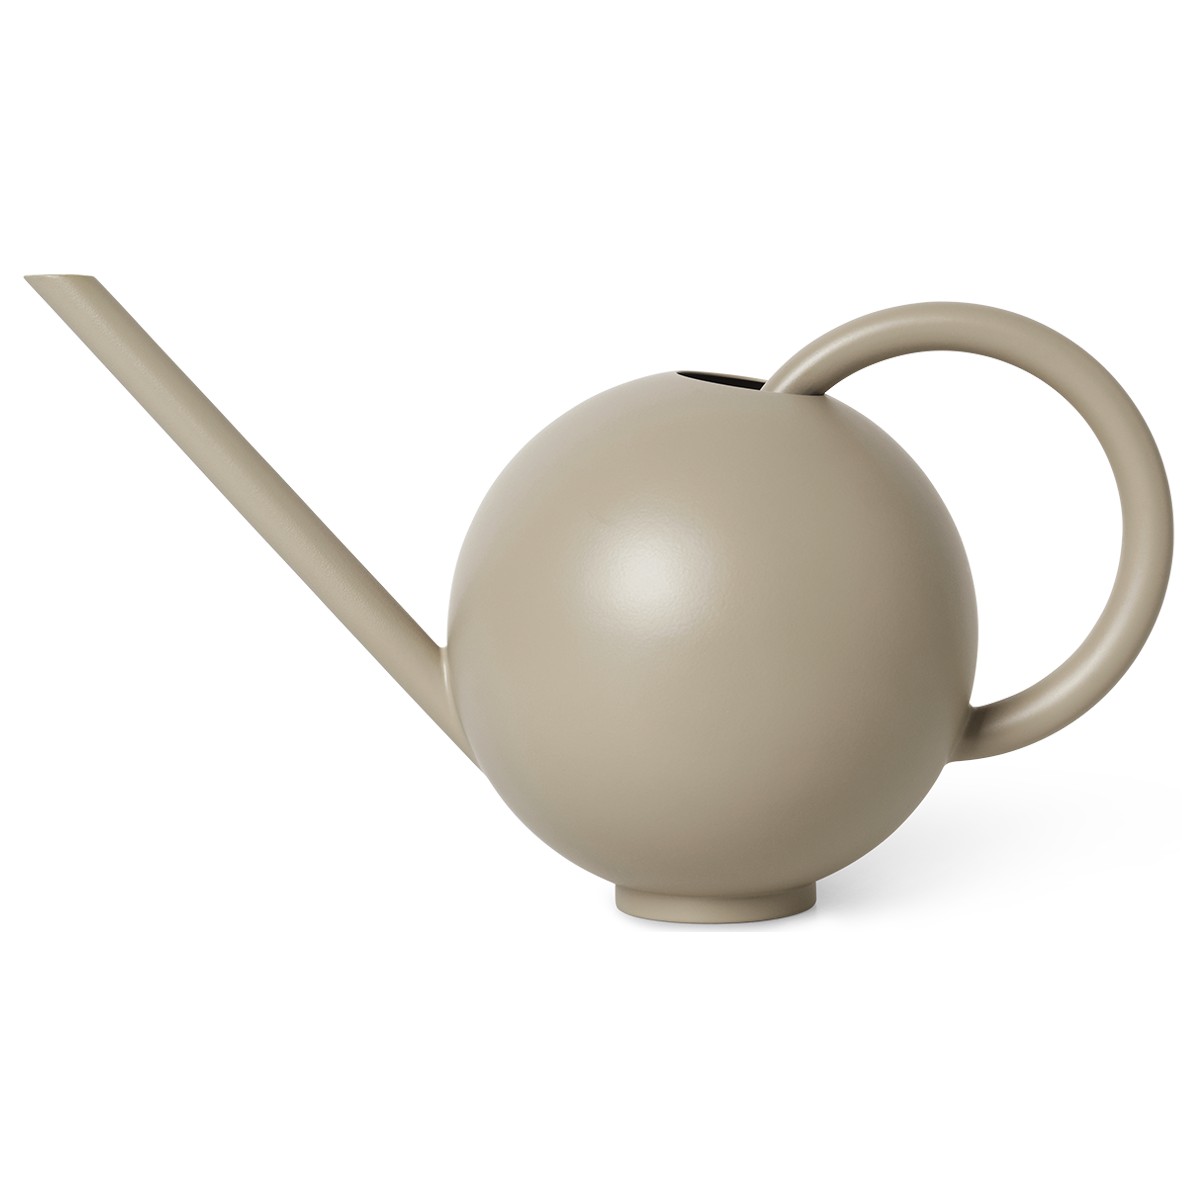 Orb watering can - cashmere